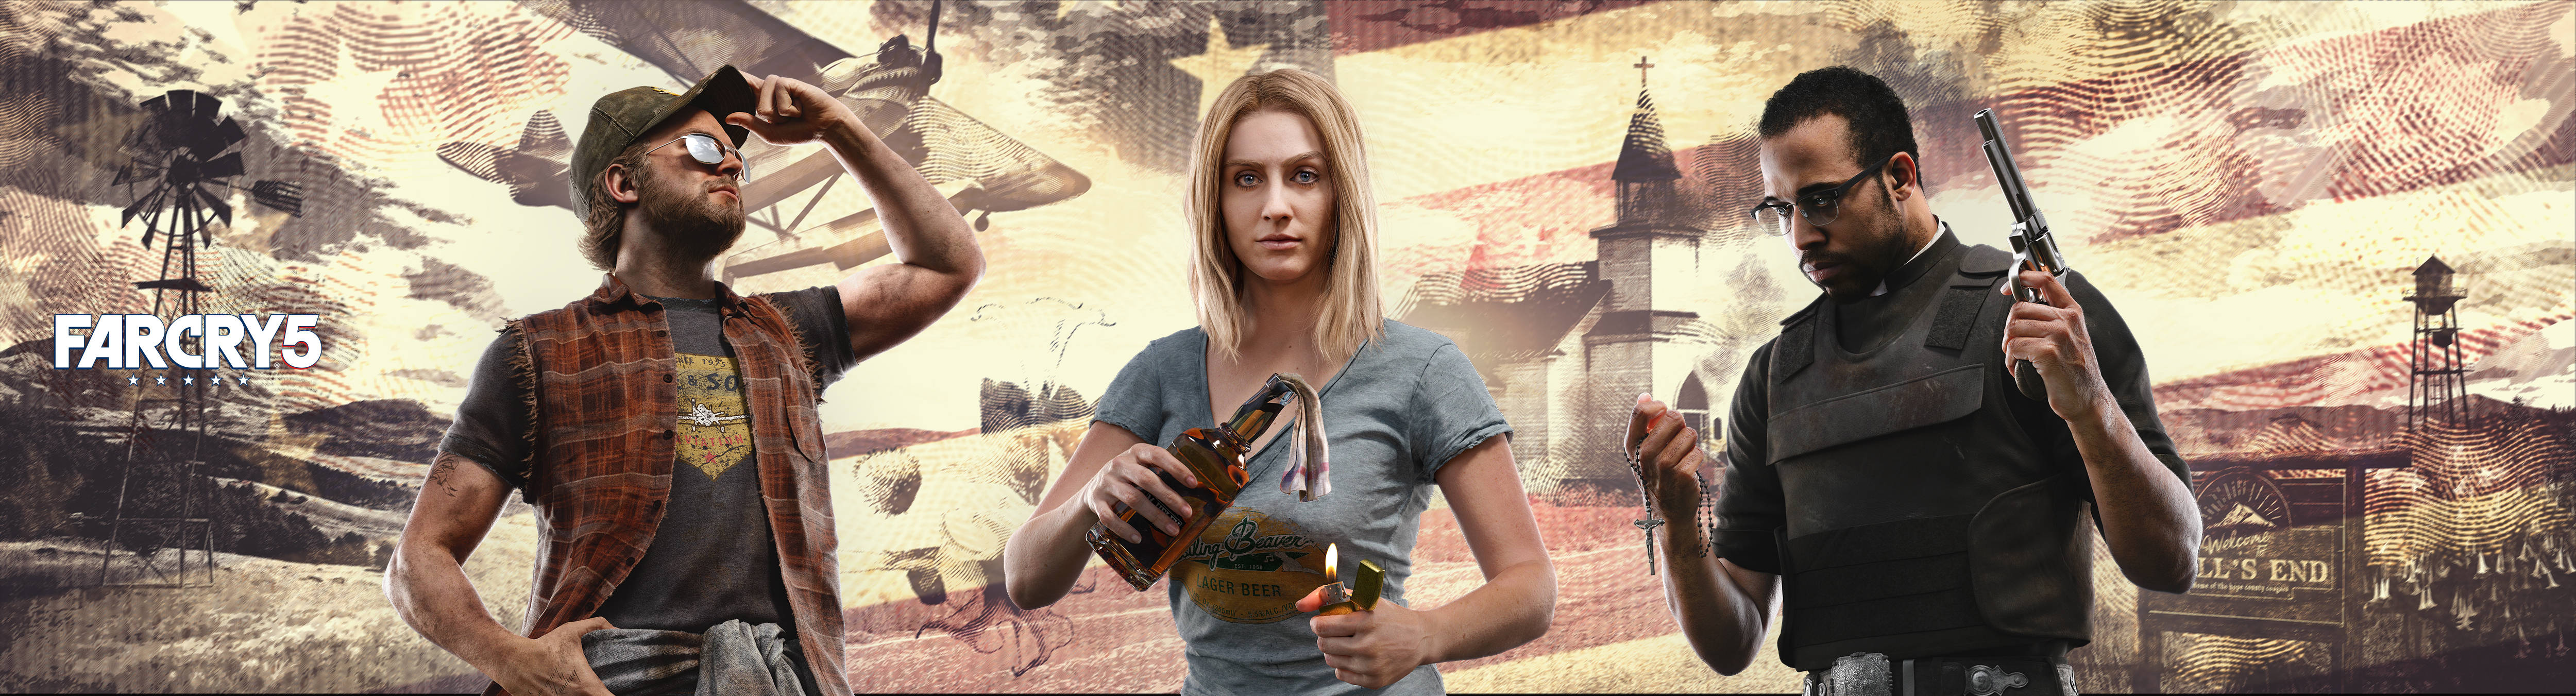 Far Cry 5 Characters Against Us Flag Wallpaper